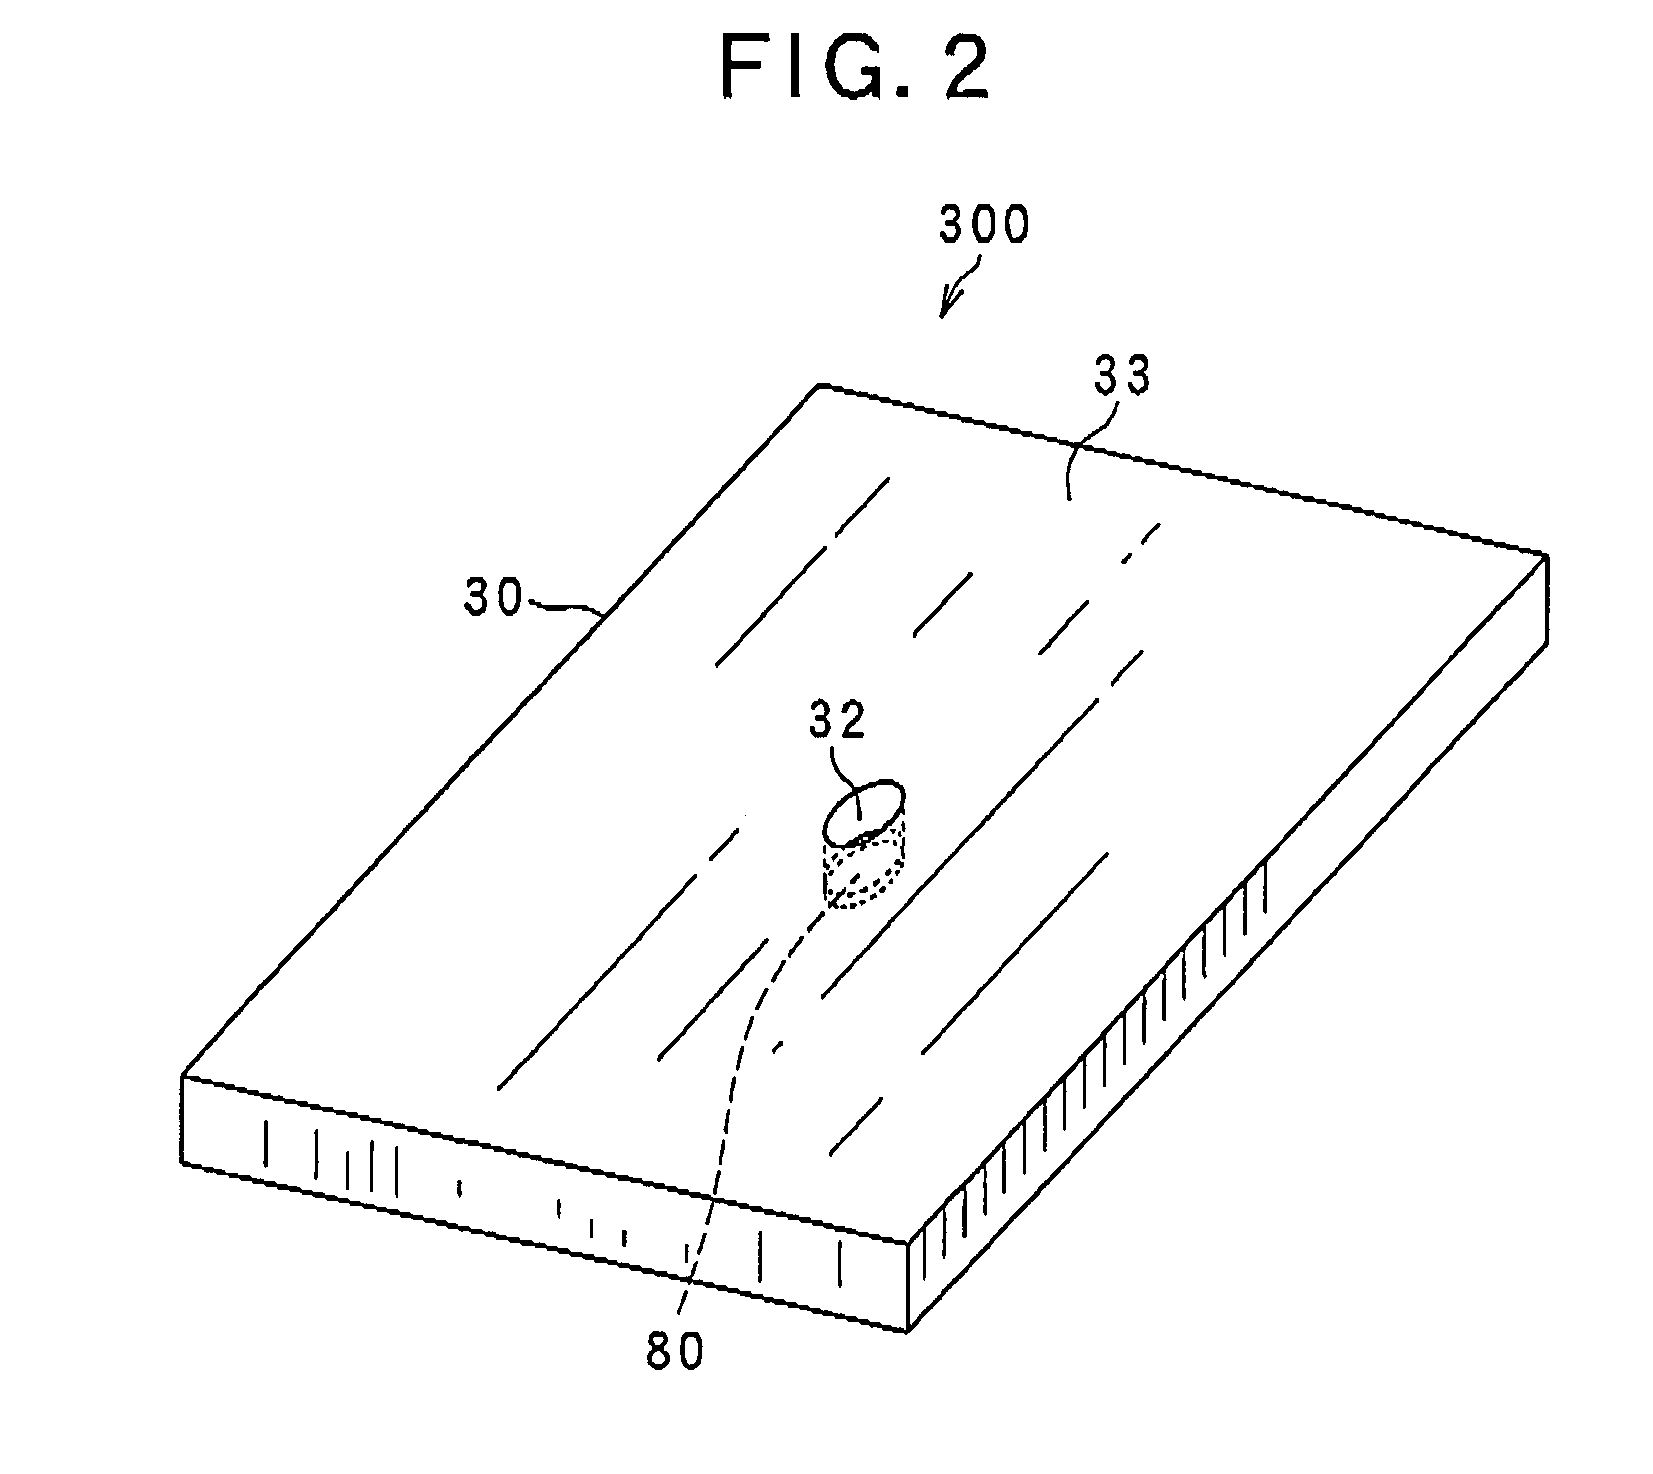 Laser radar apparatus that measures direction and distance of an object